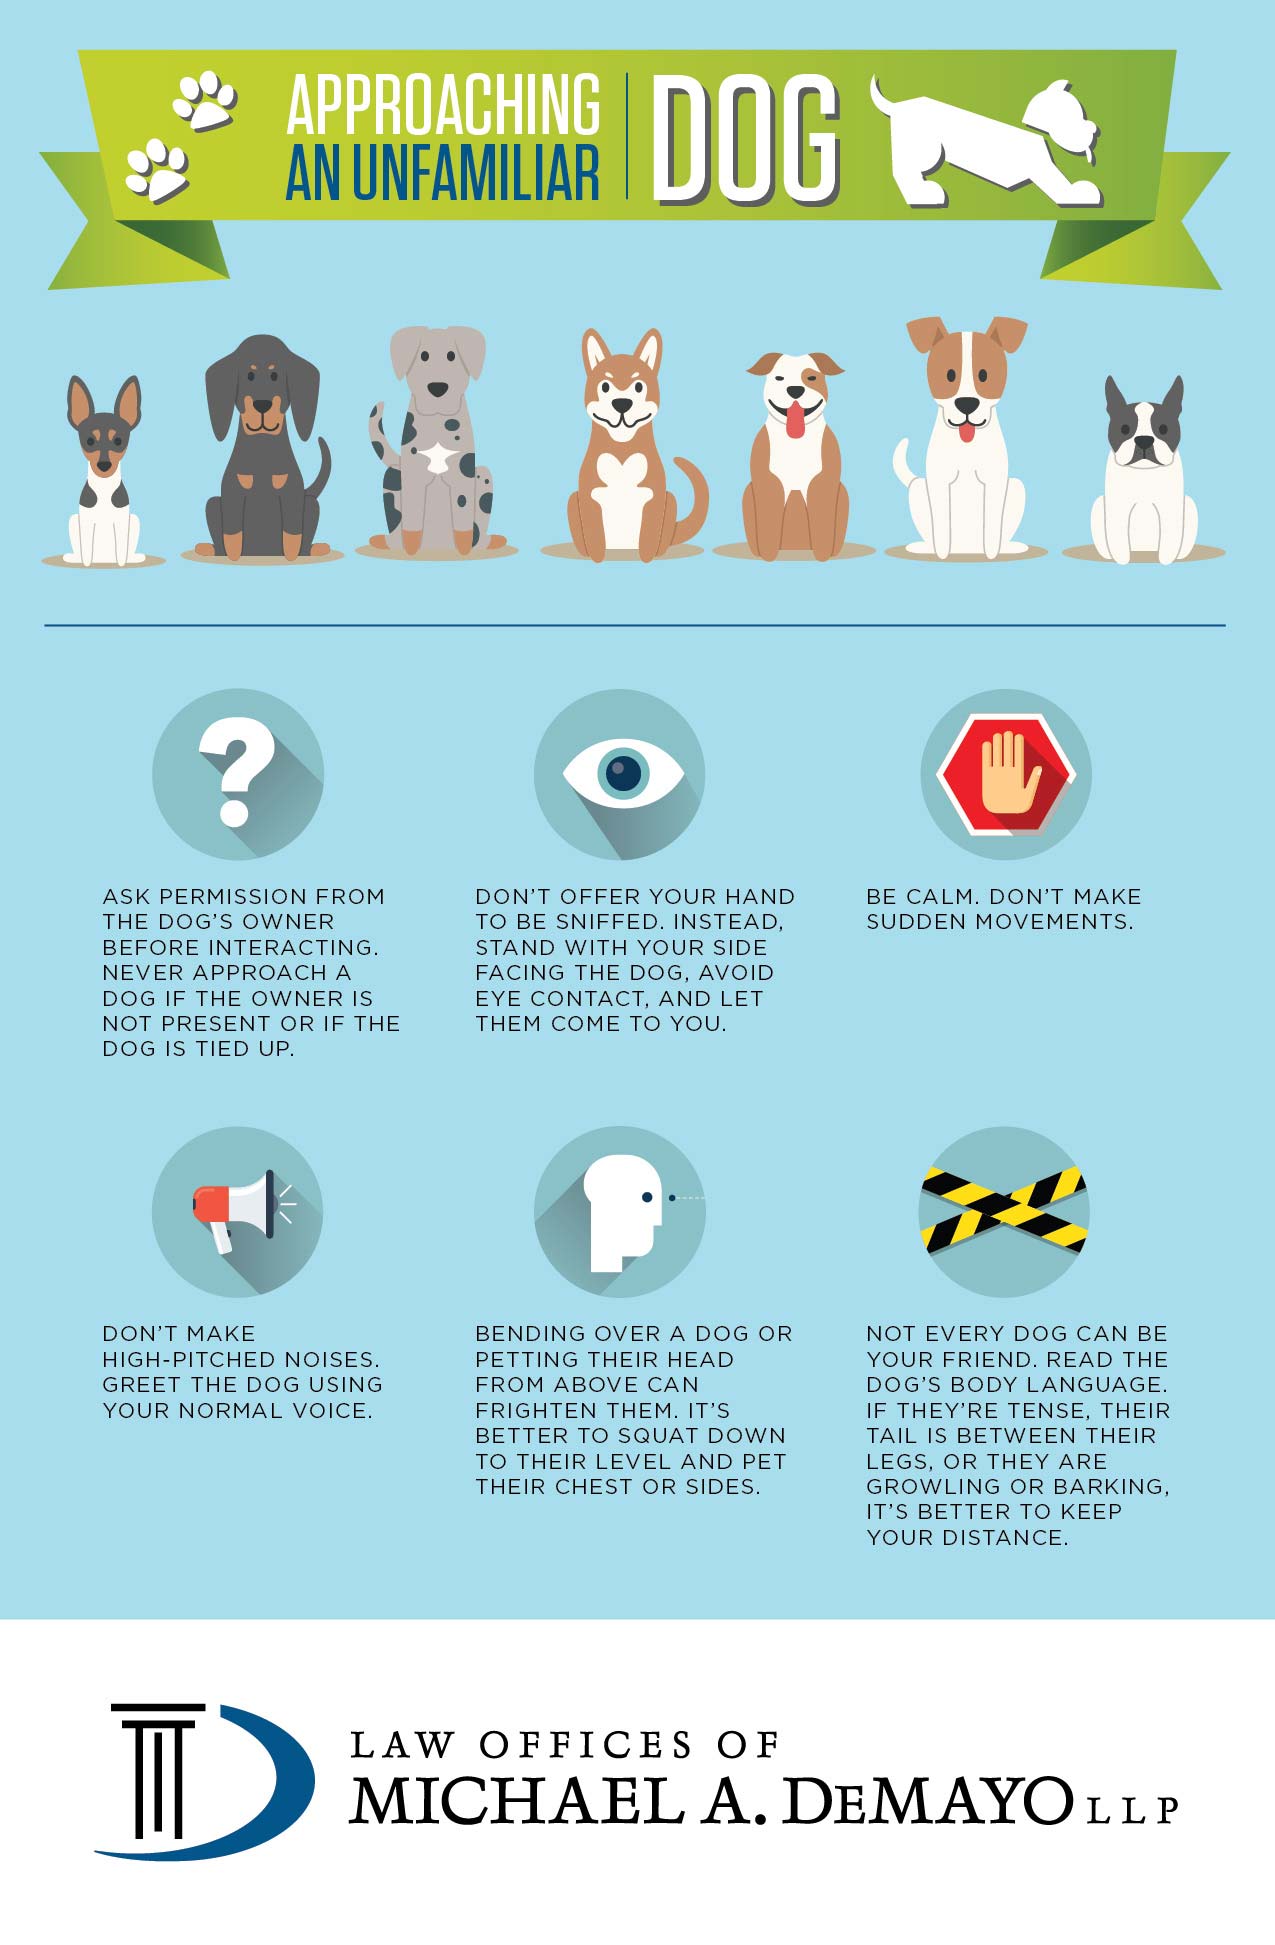 How to Properly Approach a Dog [INFOGRAPHIC] - Image